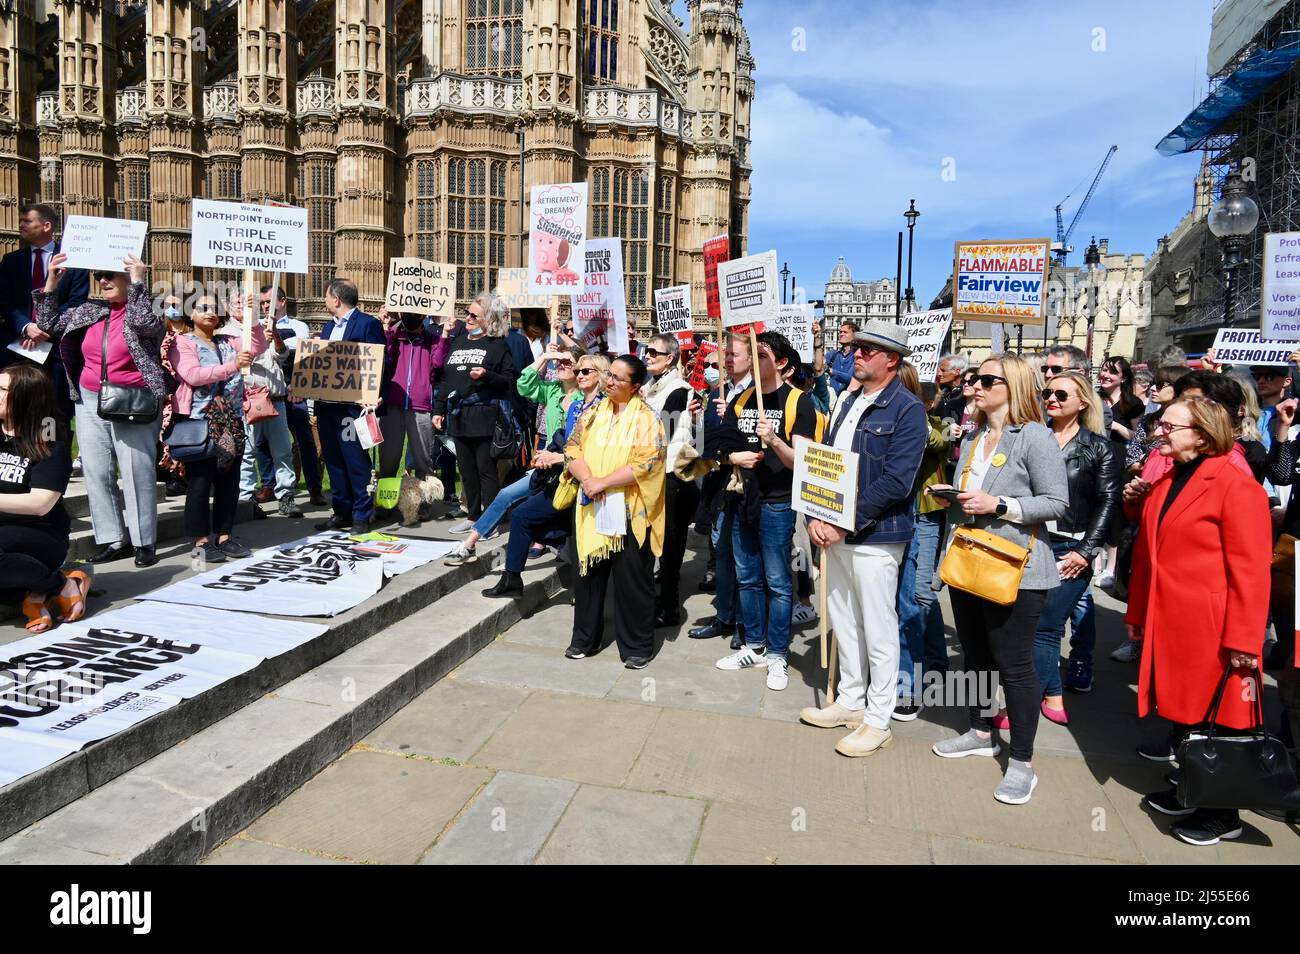 London, UK. Leaseholders and tenants gathered outside Parliament to demonstrate while the Building Safety Bill was debated in the House of Commons today. MPs from all the main political parties attended to speak and affirm their support. Stock Photo